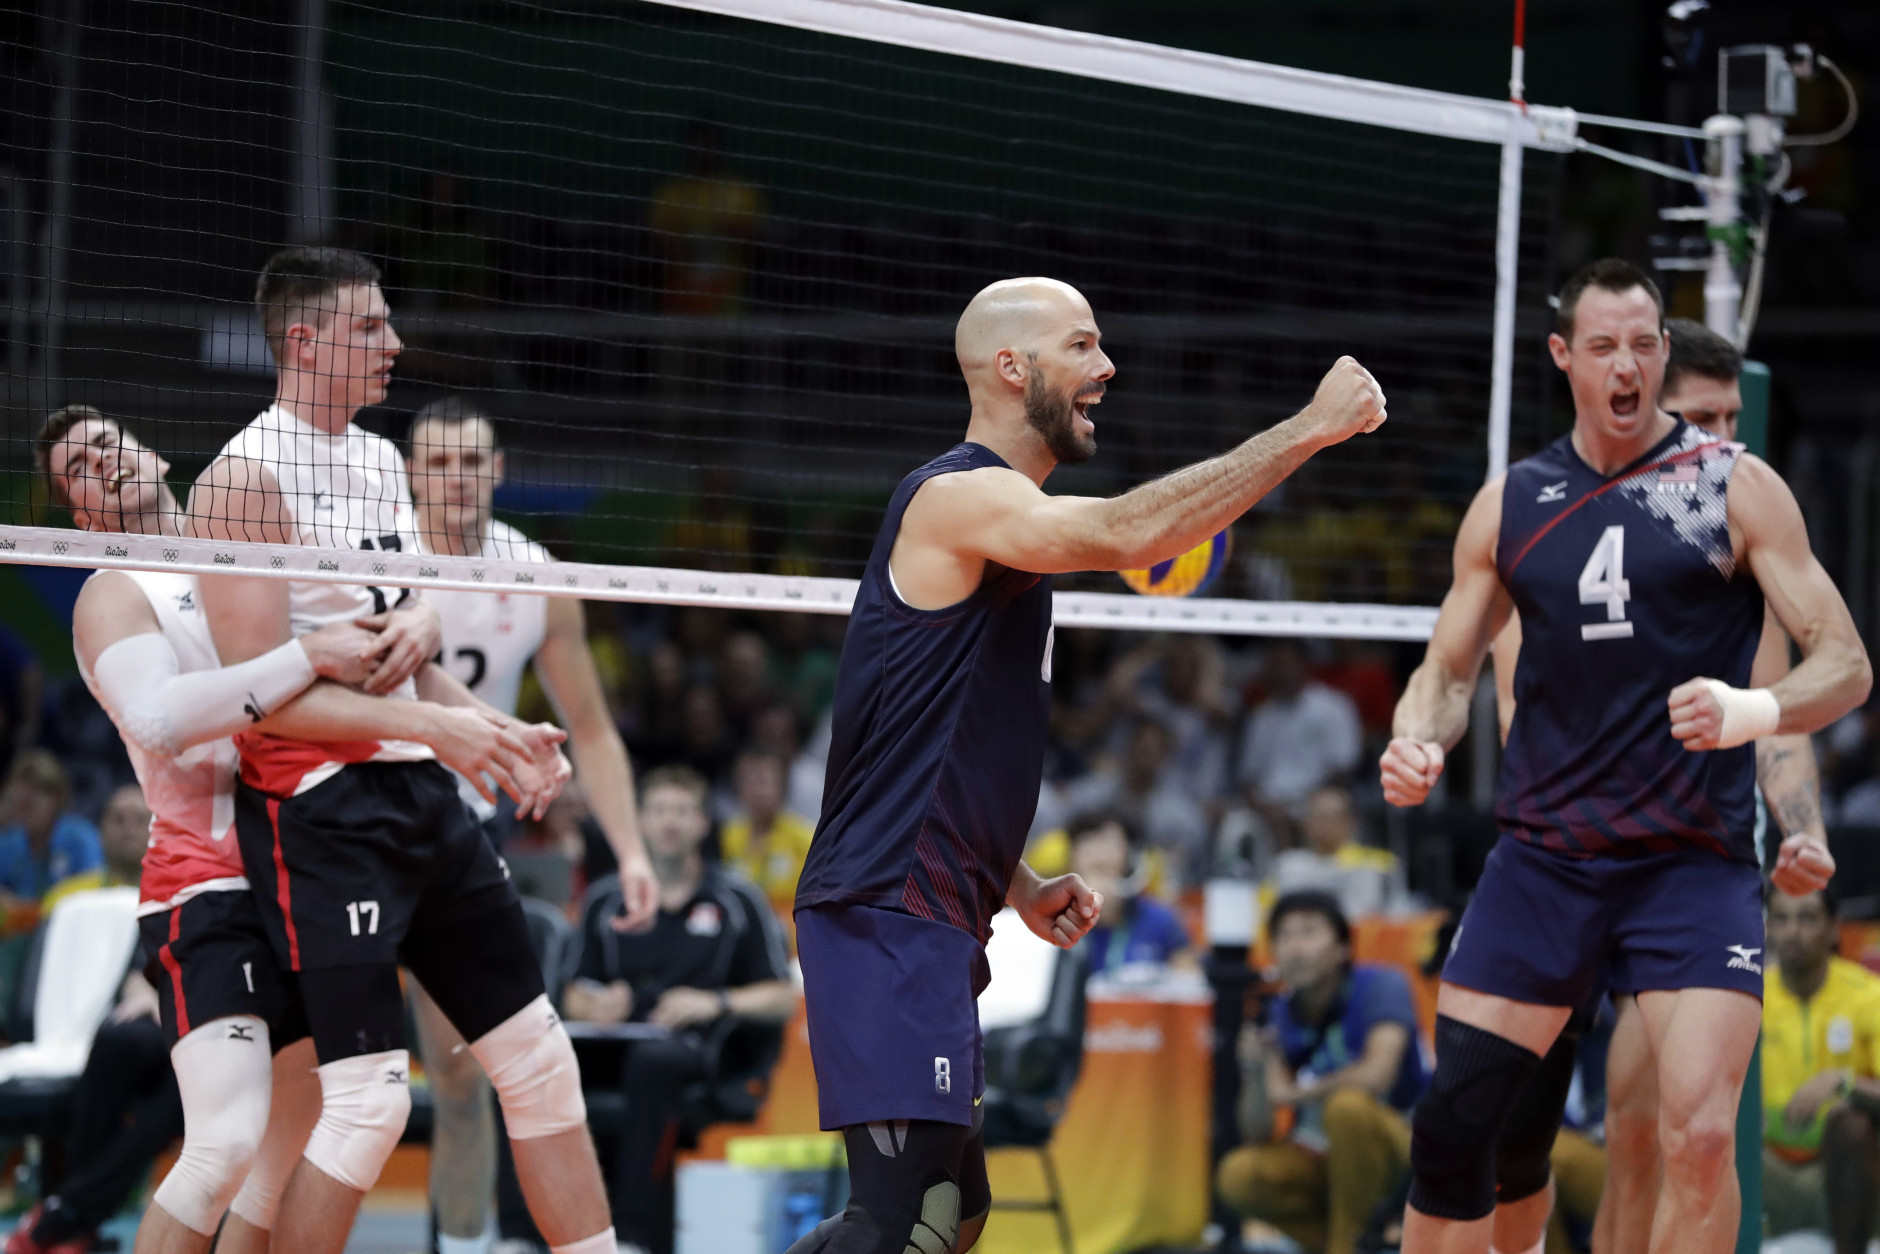 United States' William Reid Priddy, center, and David Lee, right, celebrate during a men's preliminary volleyball match against Canada at the 2016 Summer Olympics in Rio de Janeiro, Brazil, Sunday, Aug. 7, 2016. (AP Photo/Jeff Roberson)